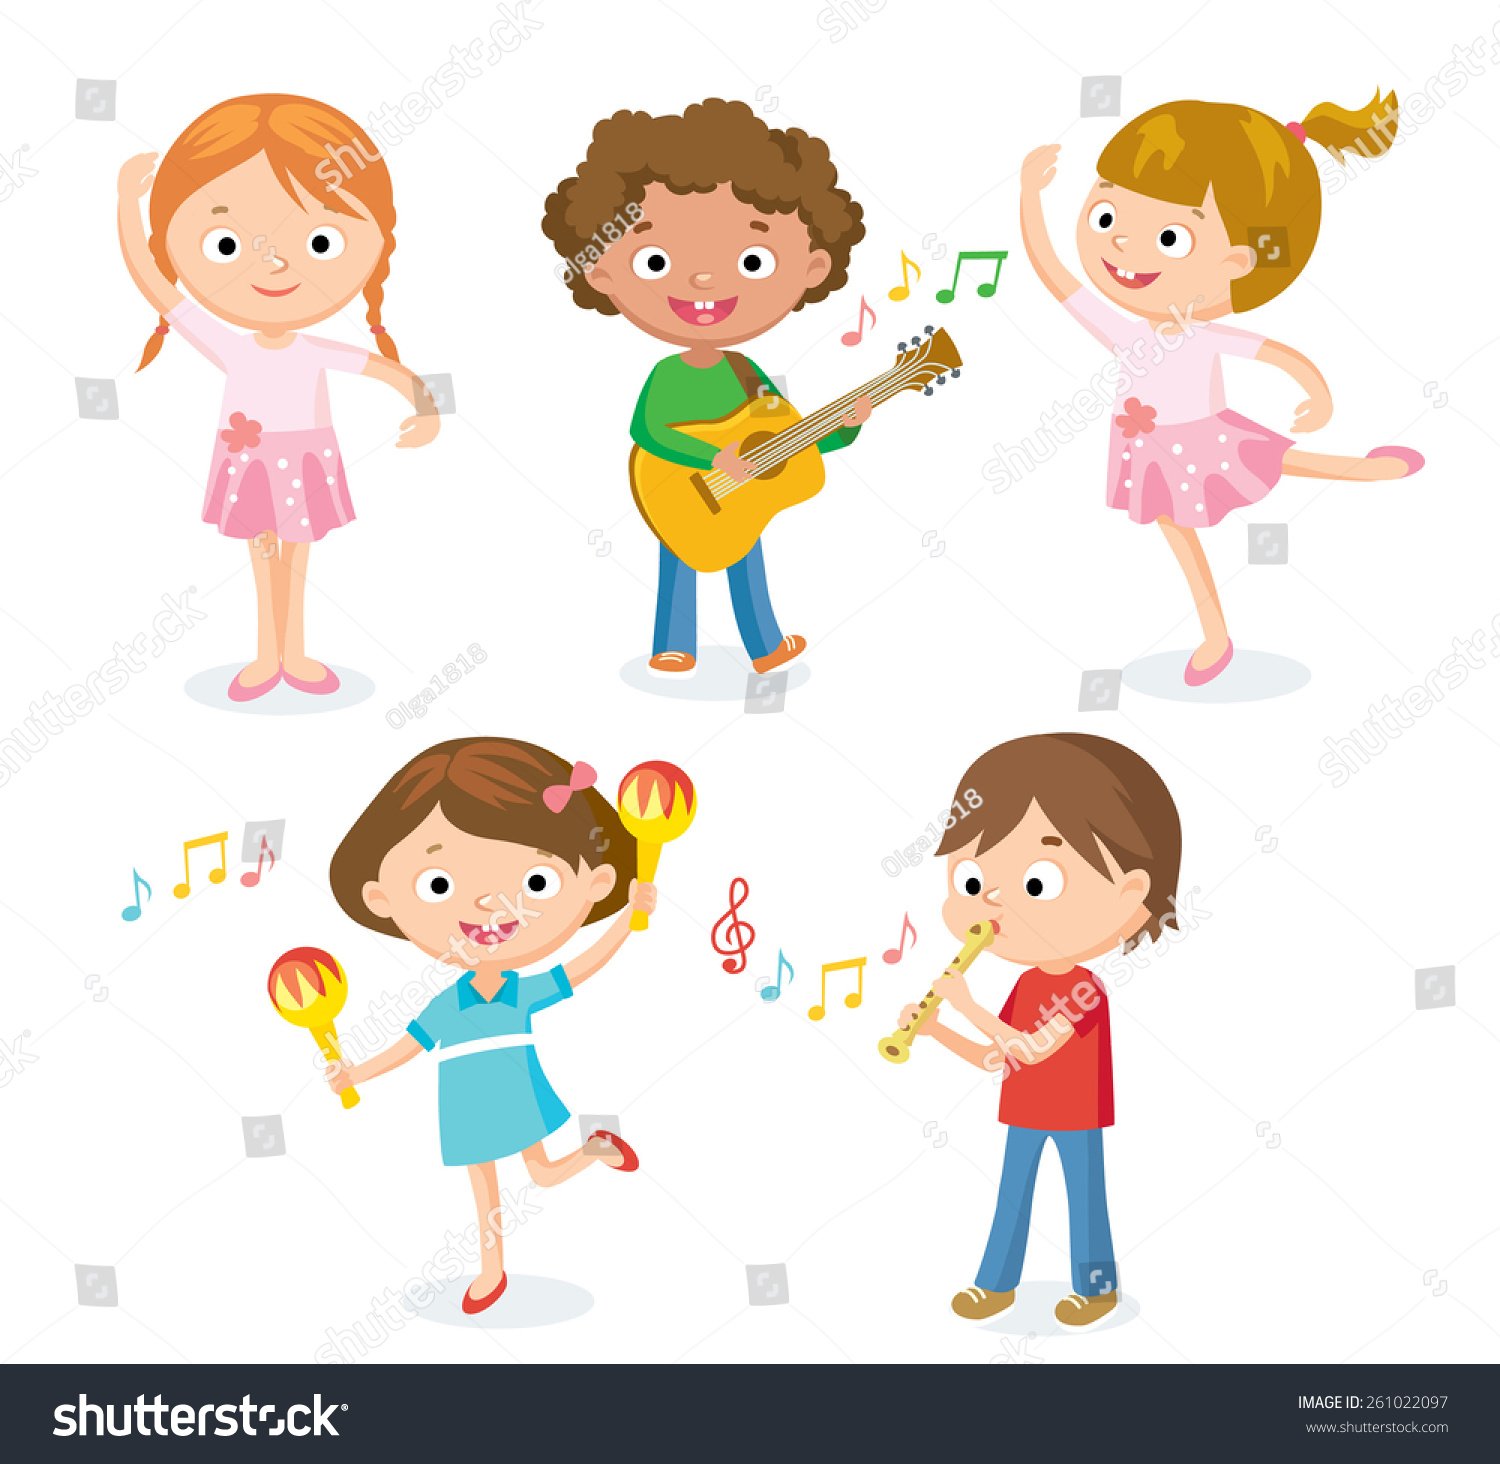 Creative Dancing Kids And Kids With Musical Instruments Stock Vector ...